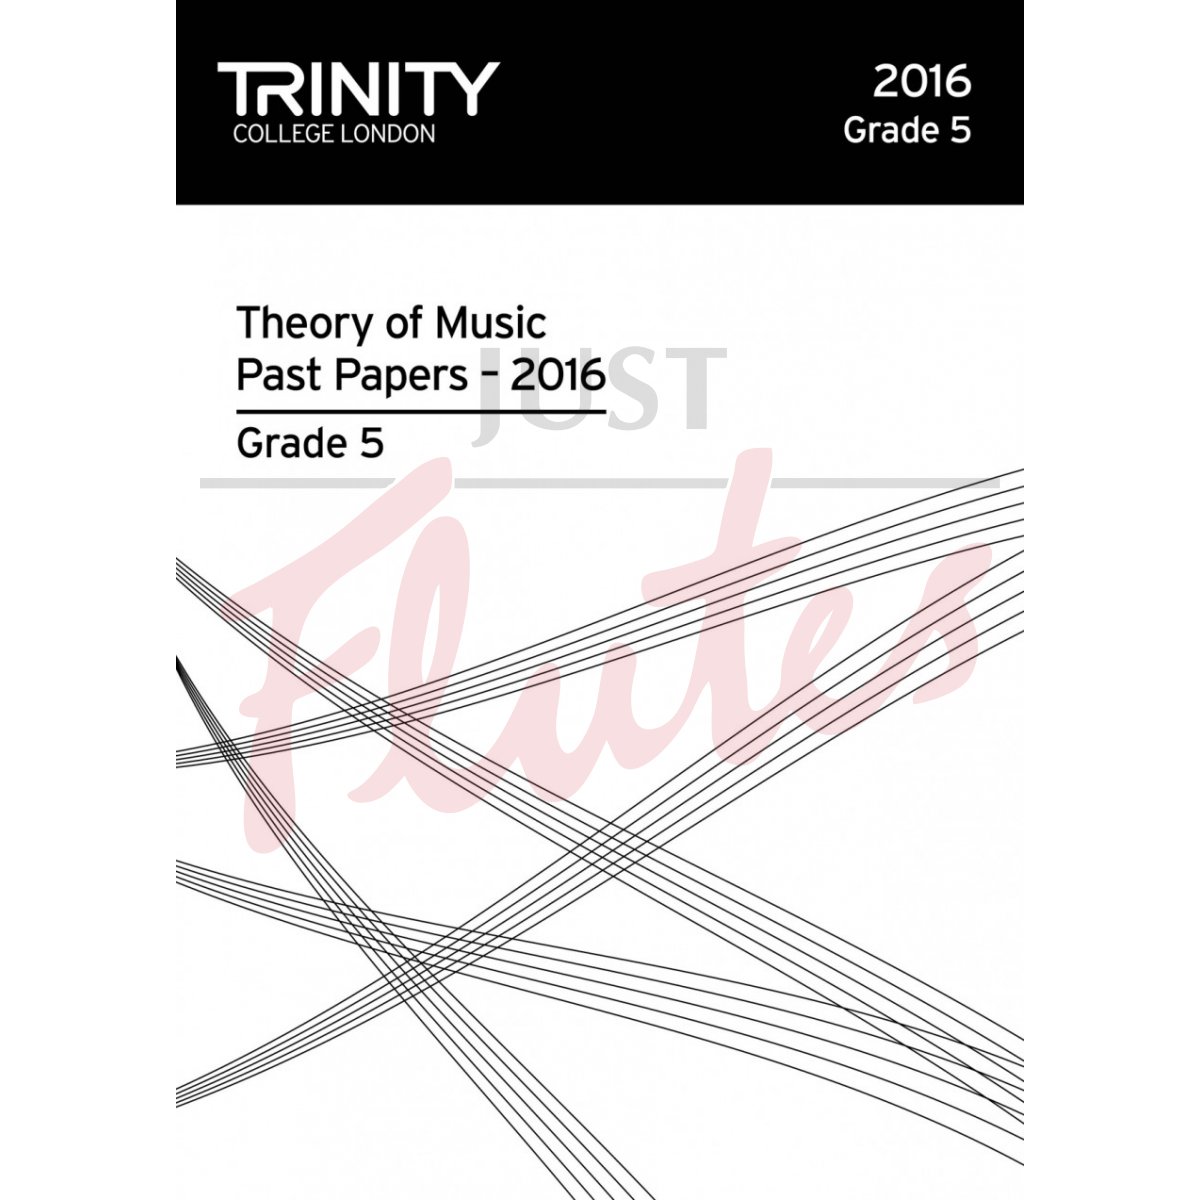 Theory of Music Past Papers Grade 5, 2016